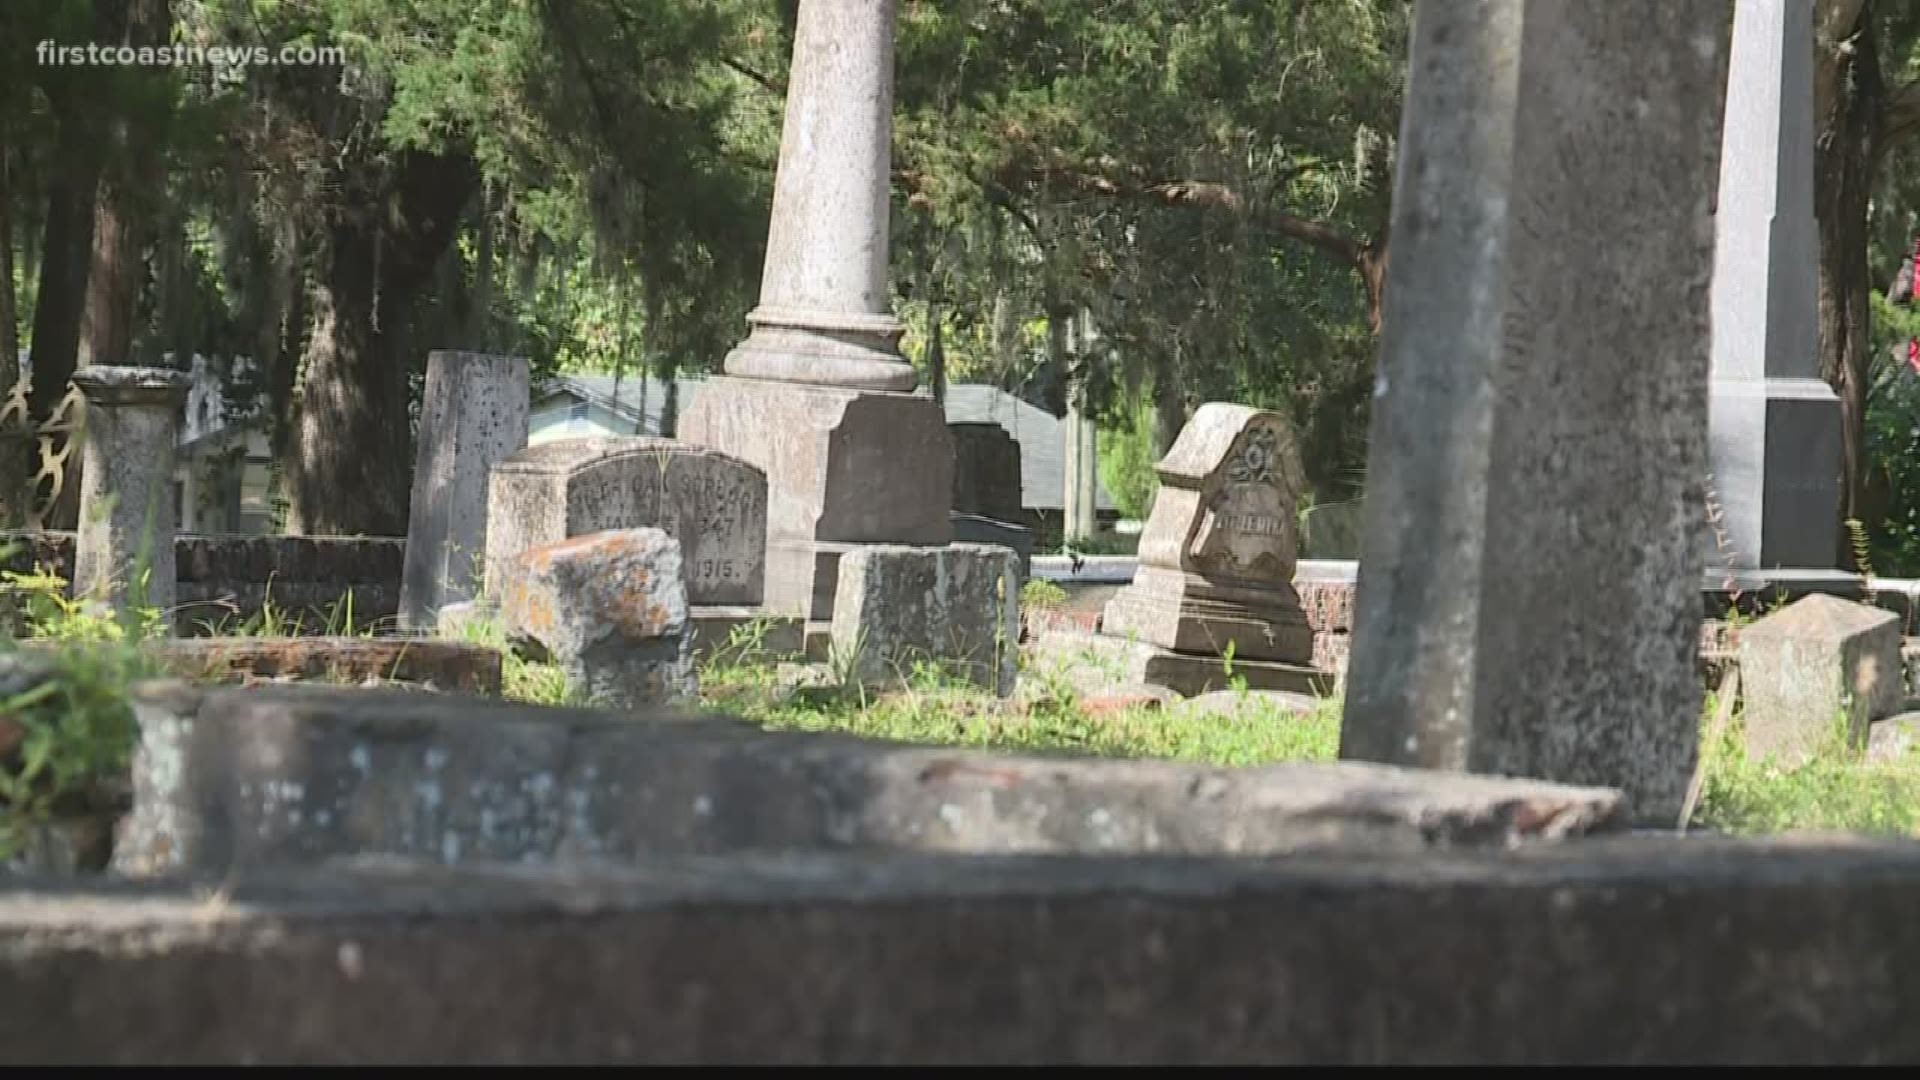 The Old City Cemetery was established in 1852 and its age is showing, but family members of the loved ones buried there say being old is not an excuse for neglect.